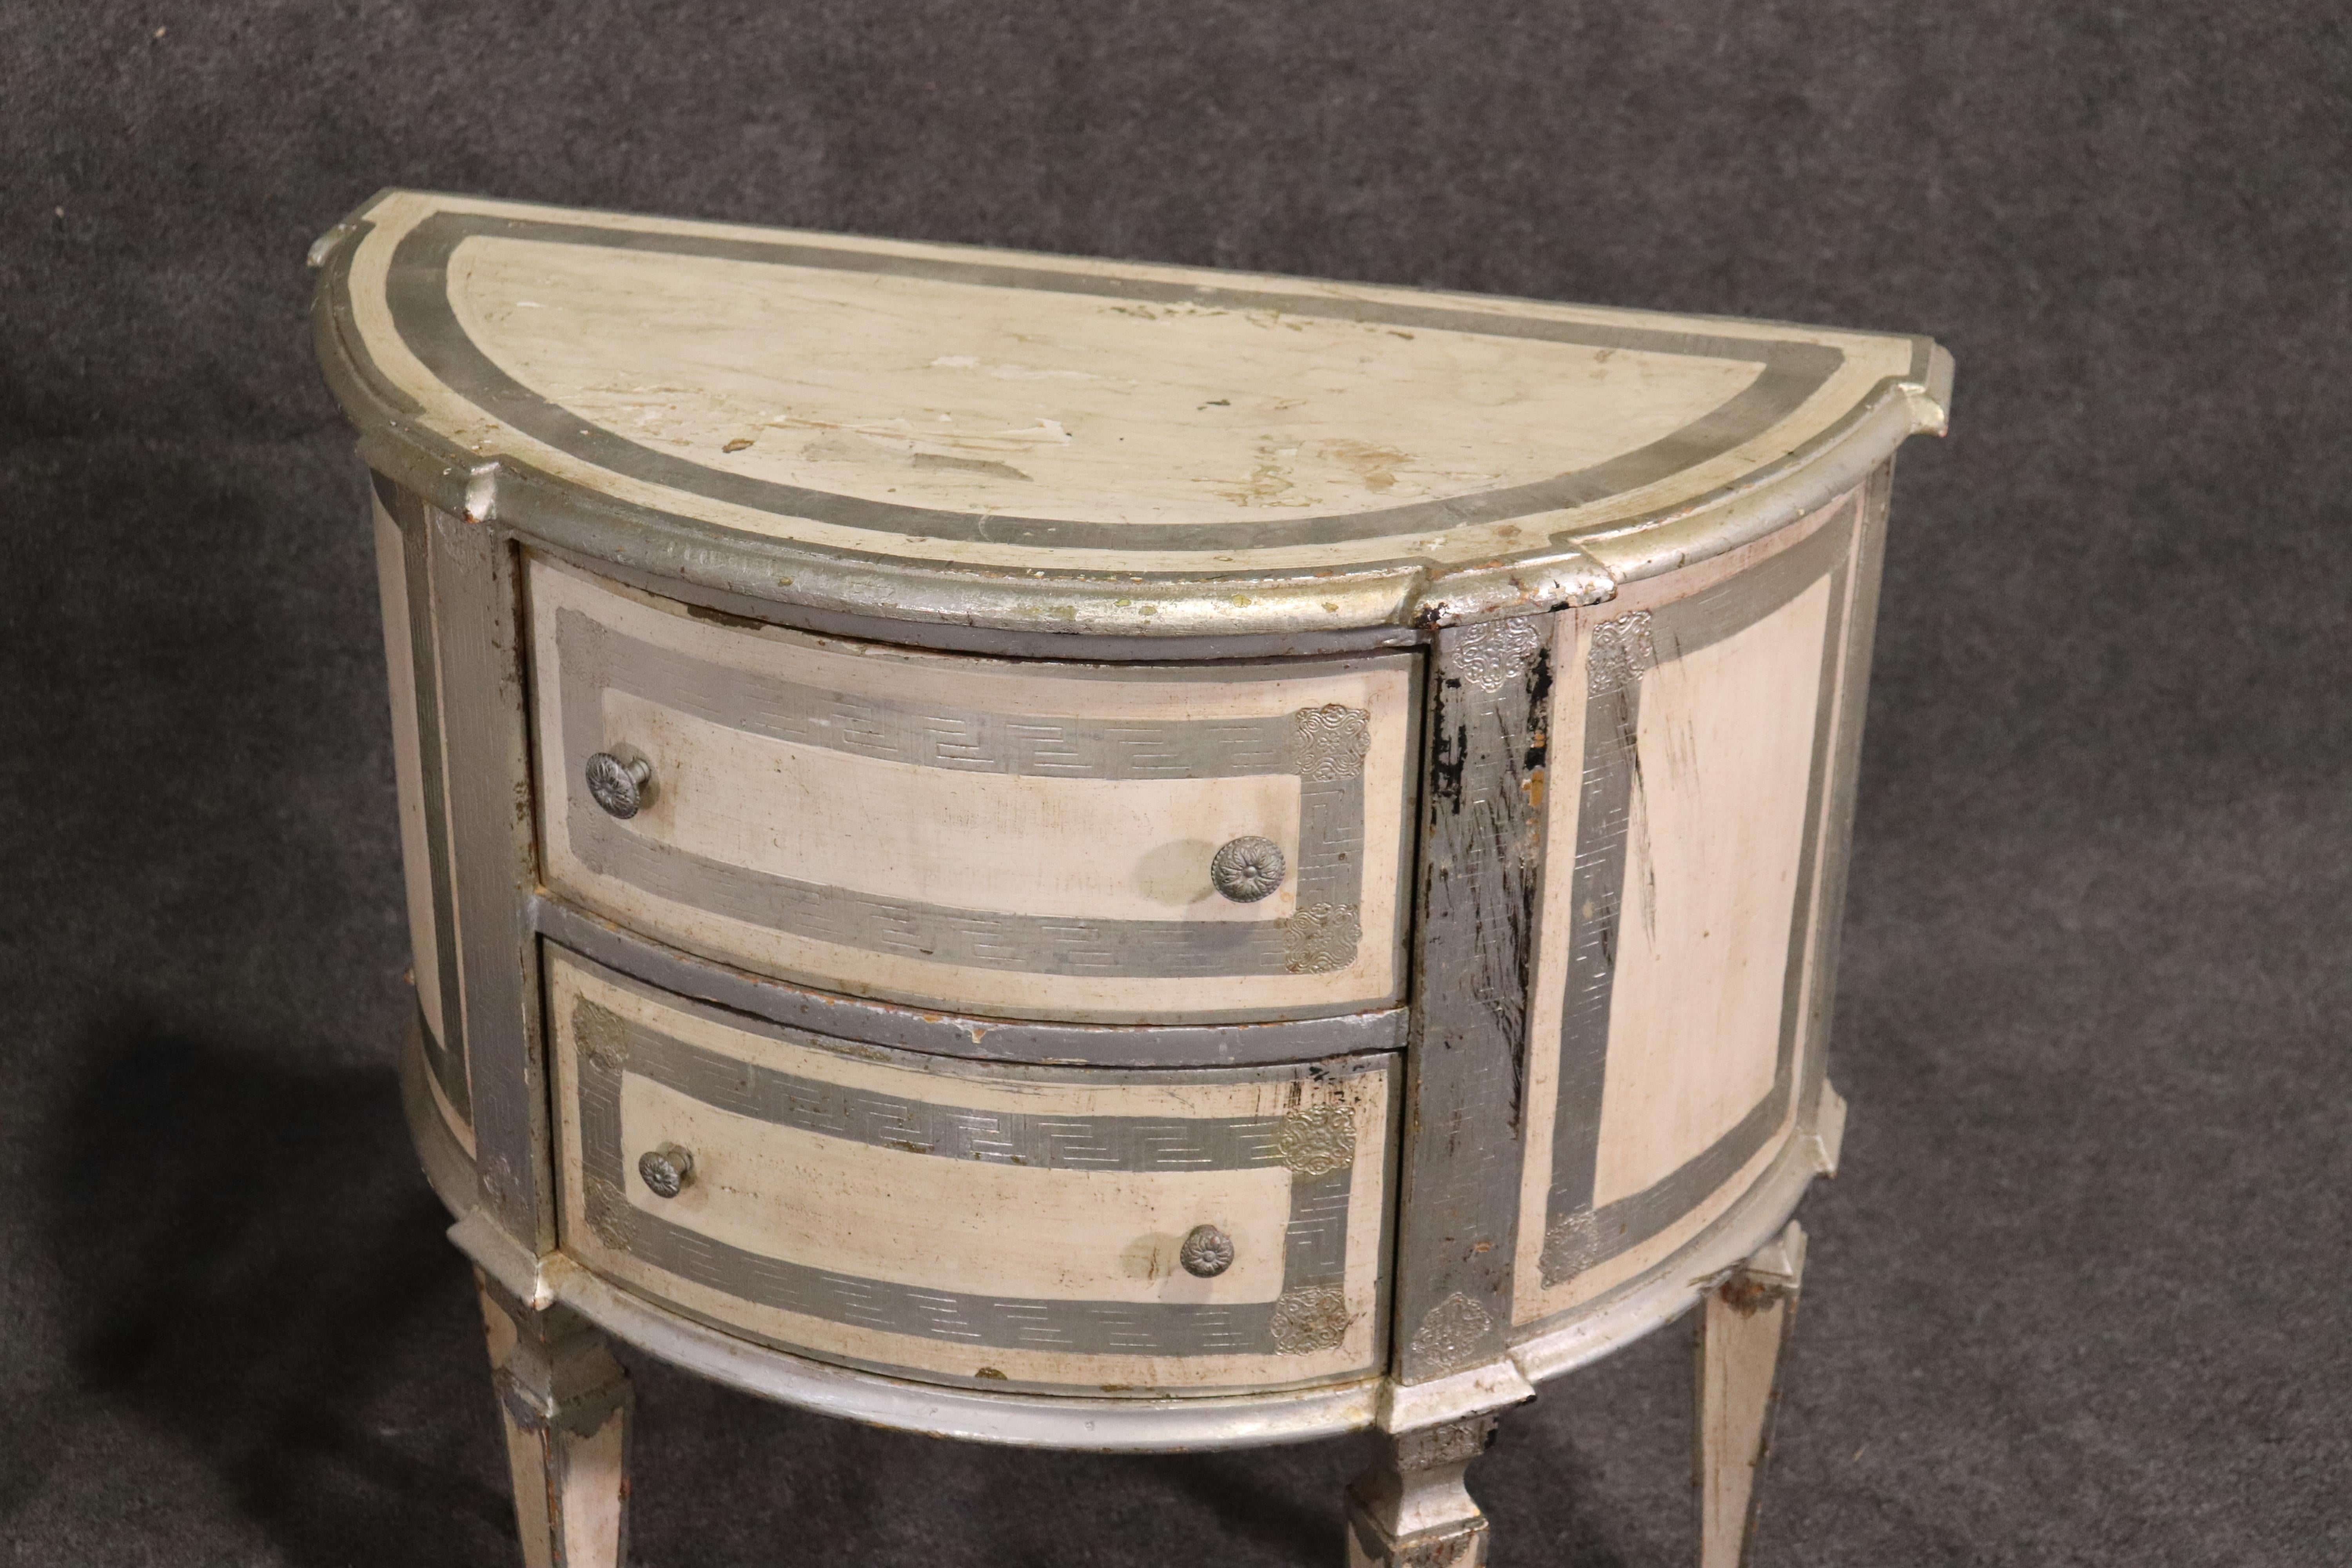 Early 20th Century Italian Florentine Demilune Nightstands Commodes in Silver Leaf and White, Pair